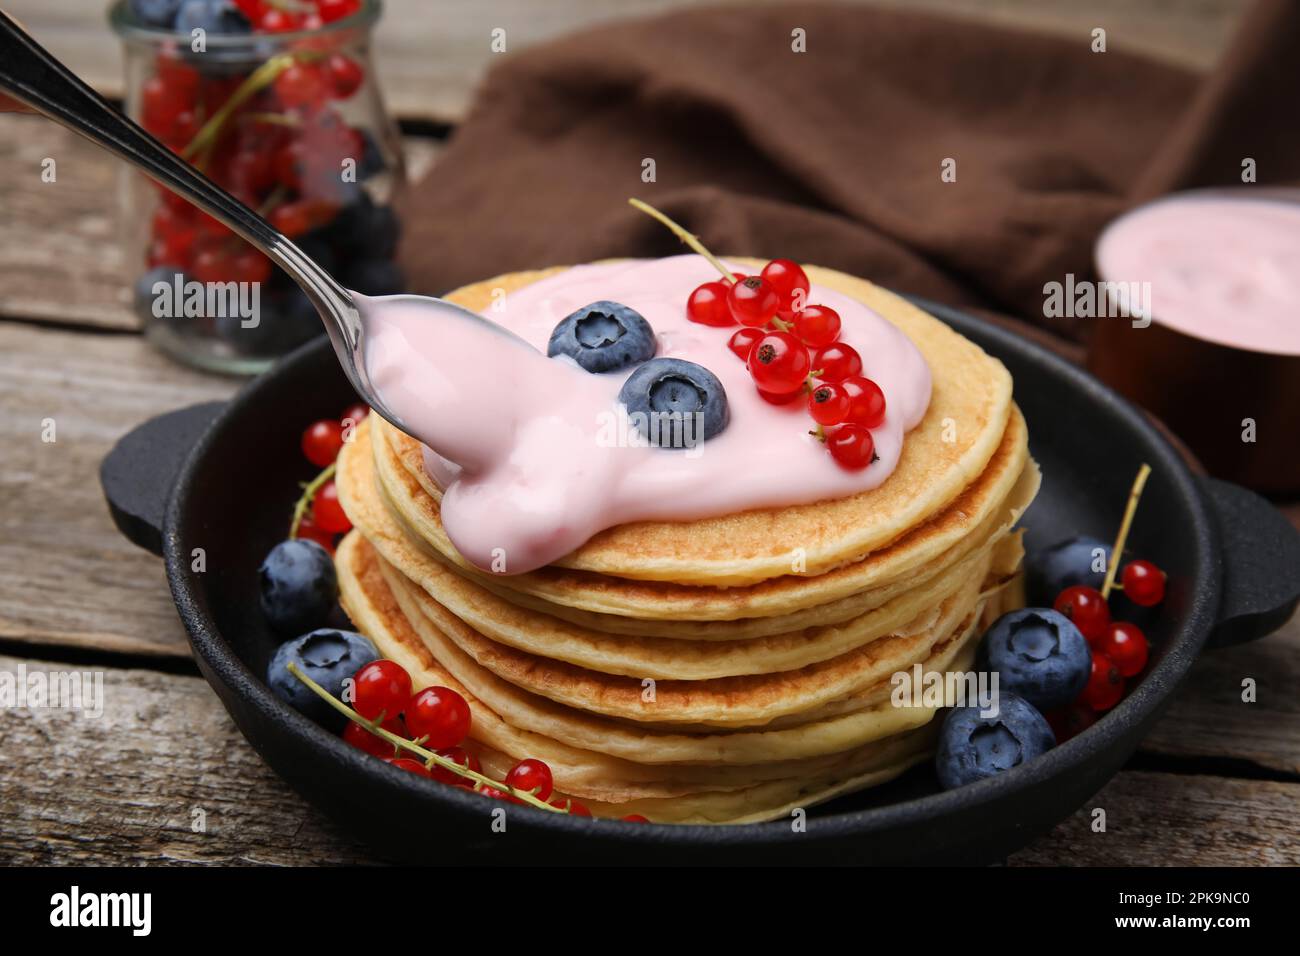 Tasty pancakes with natural yogurt, blueberries and red currants on wooden table Stock Photo